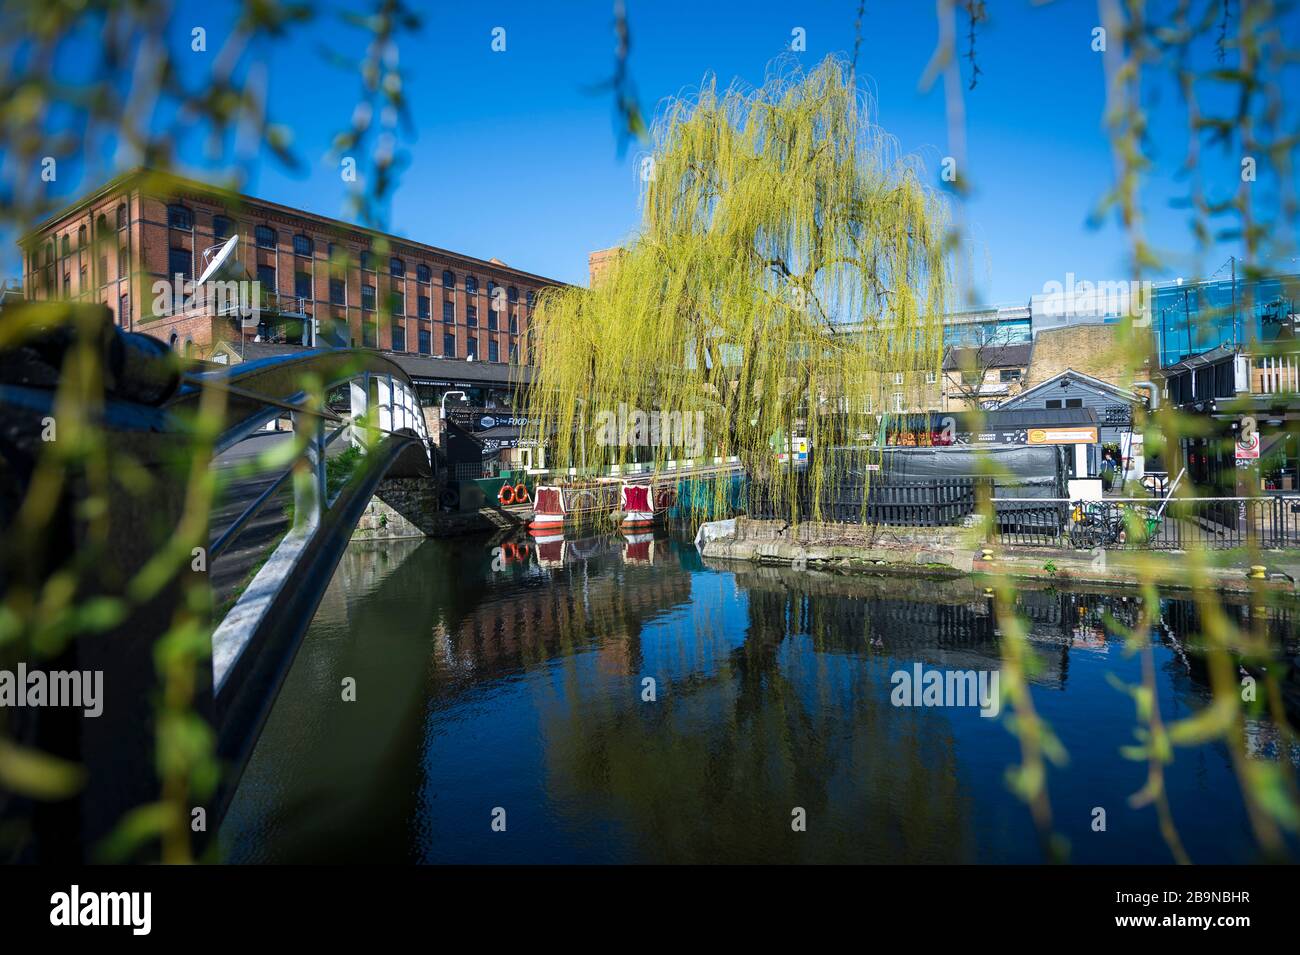 LONDON - 23 MARCH, 2020: The normally bustling Camden Lock and Market are eerily quite as the city prepares to enter lockdown due to Coronavirus. Stock Photo